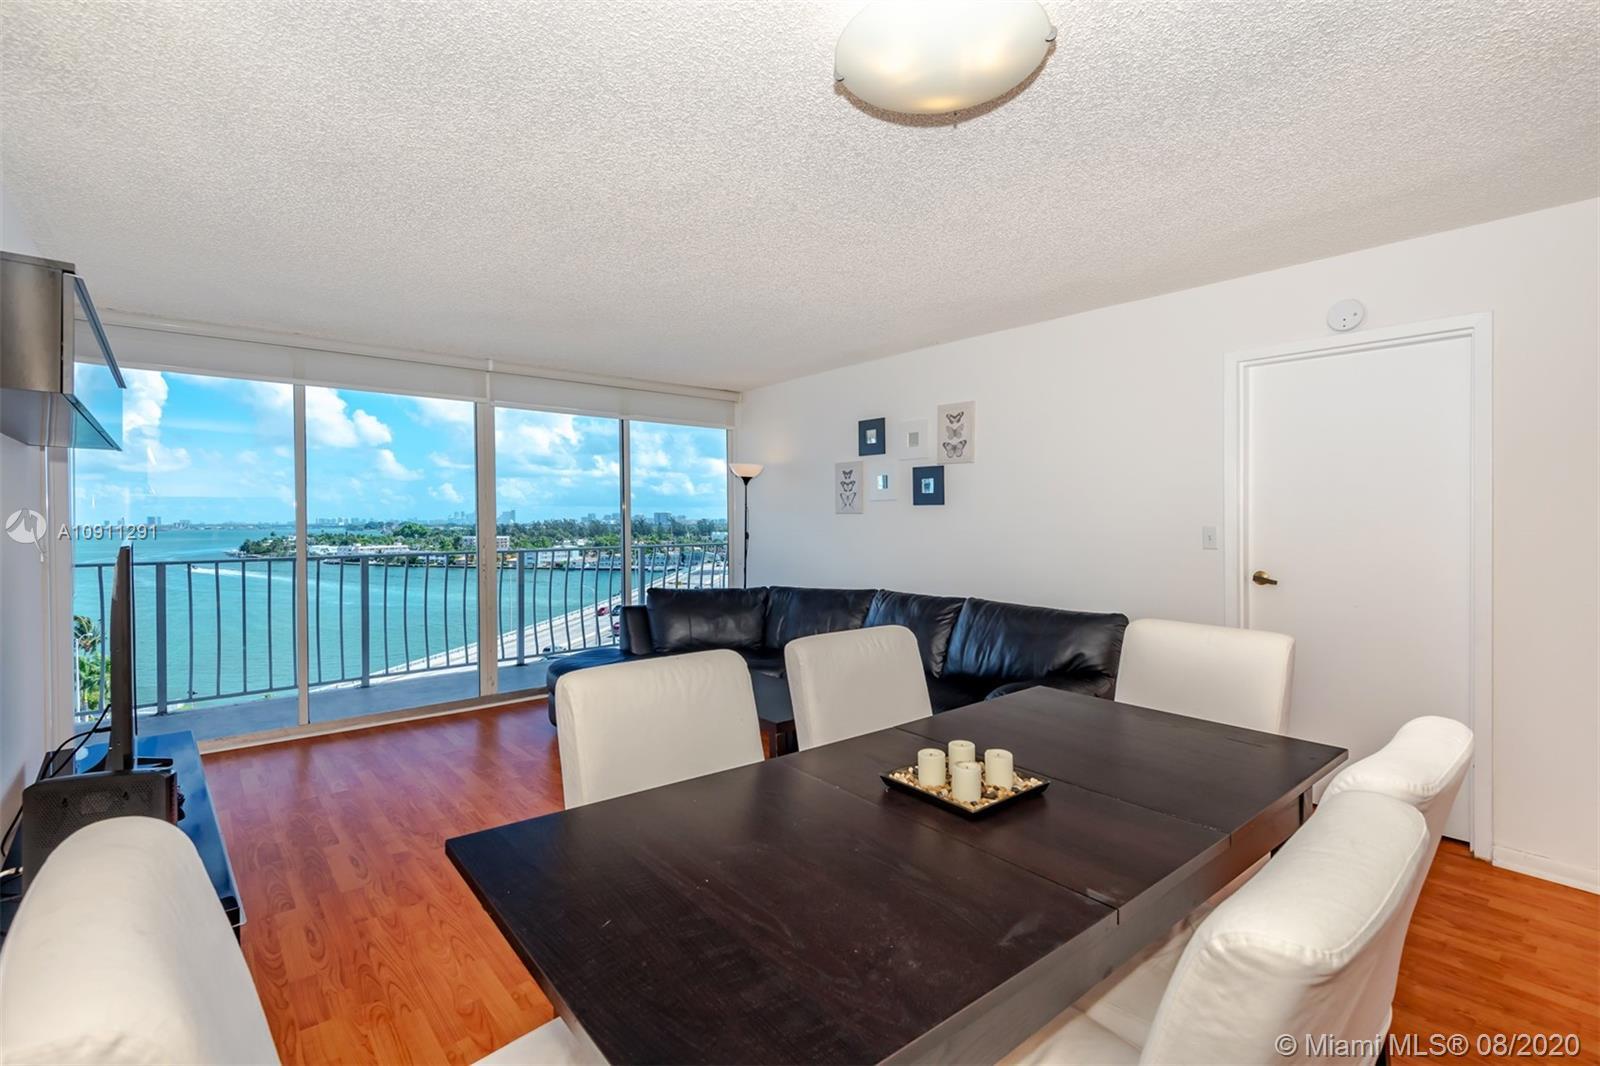 Spectacular 2 bedrooms 2 baths split floor plan with beautiful bay and city views. Located in a wate